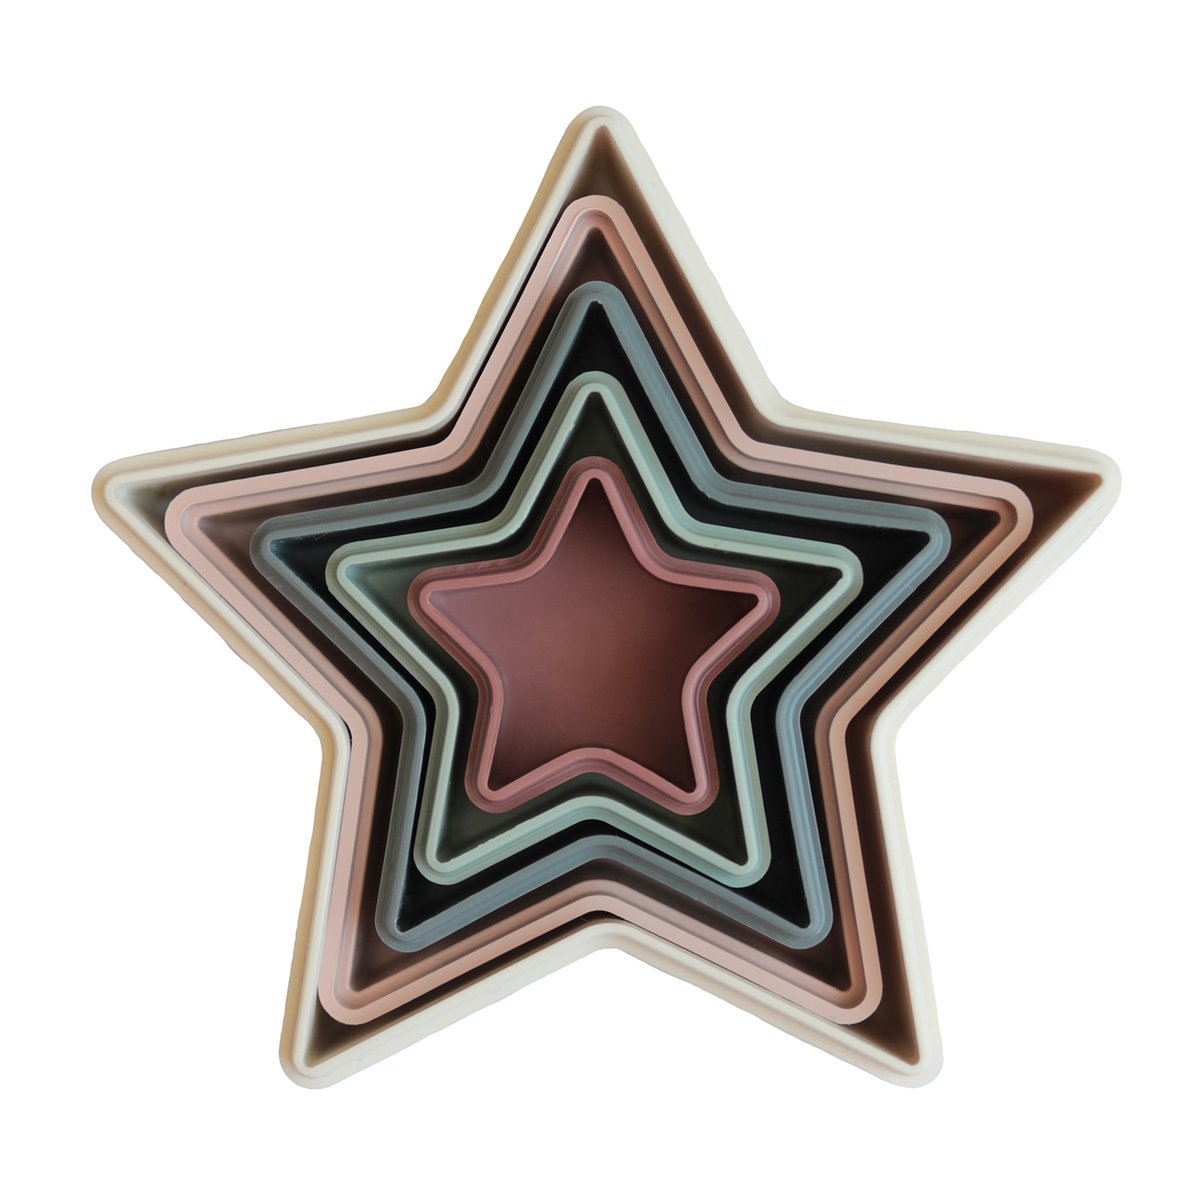 Nesting Stars Toy - The Little Je'EL.Co